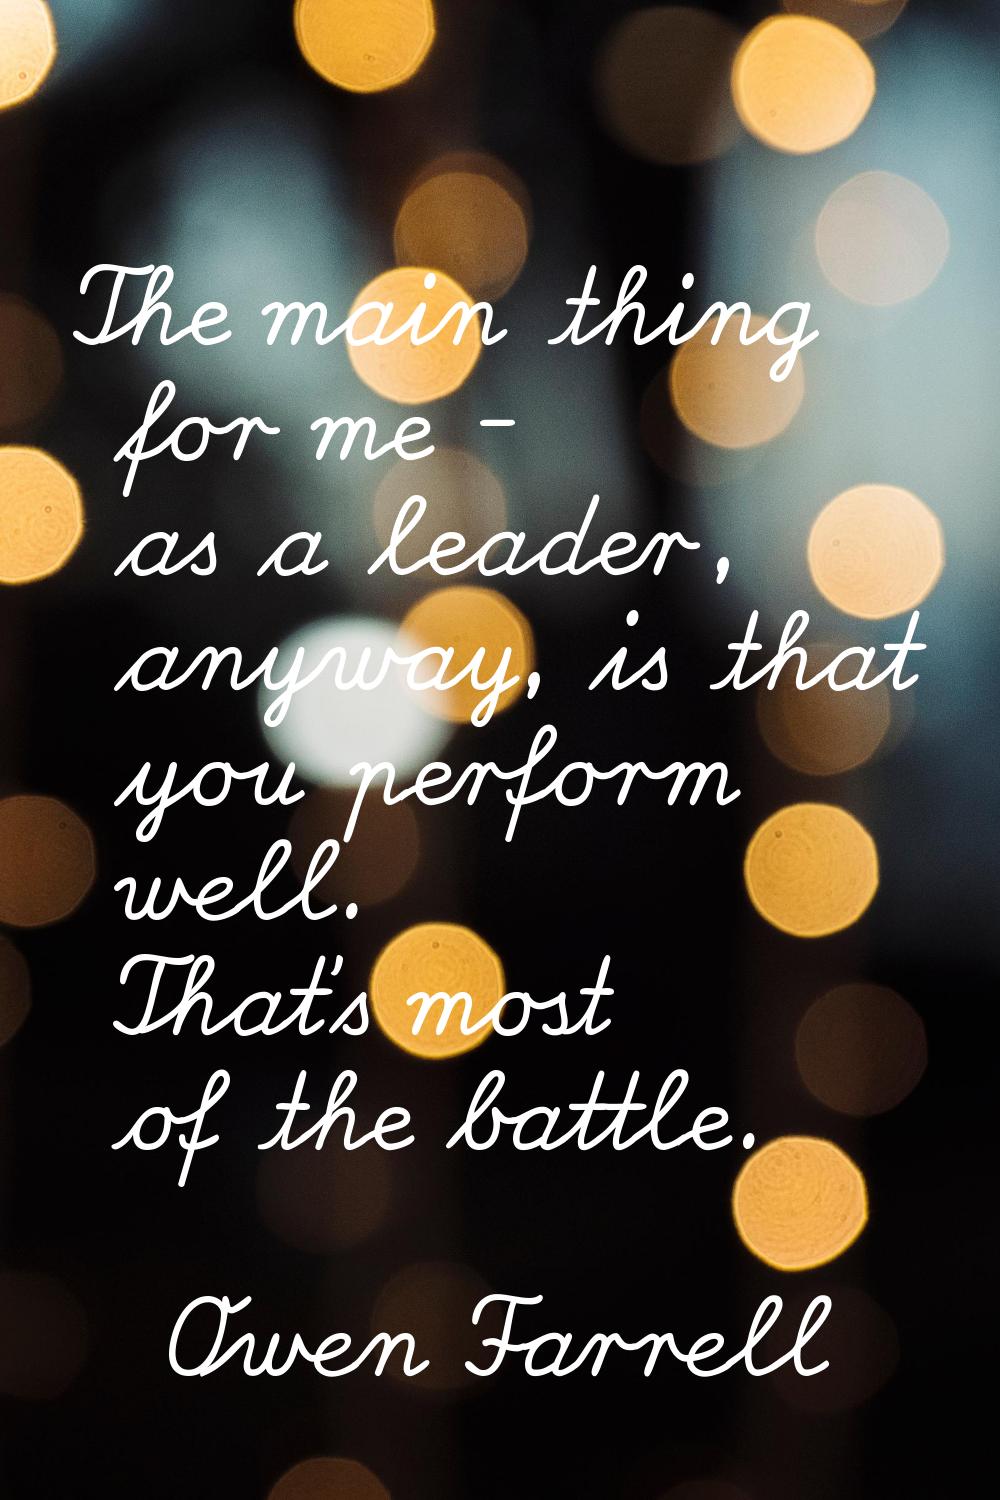 The main thing for me - as a leader, anyway, is that you perform well. That's most of the battle.